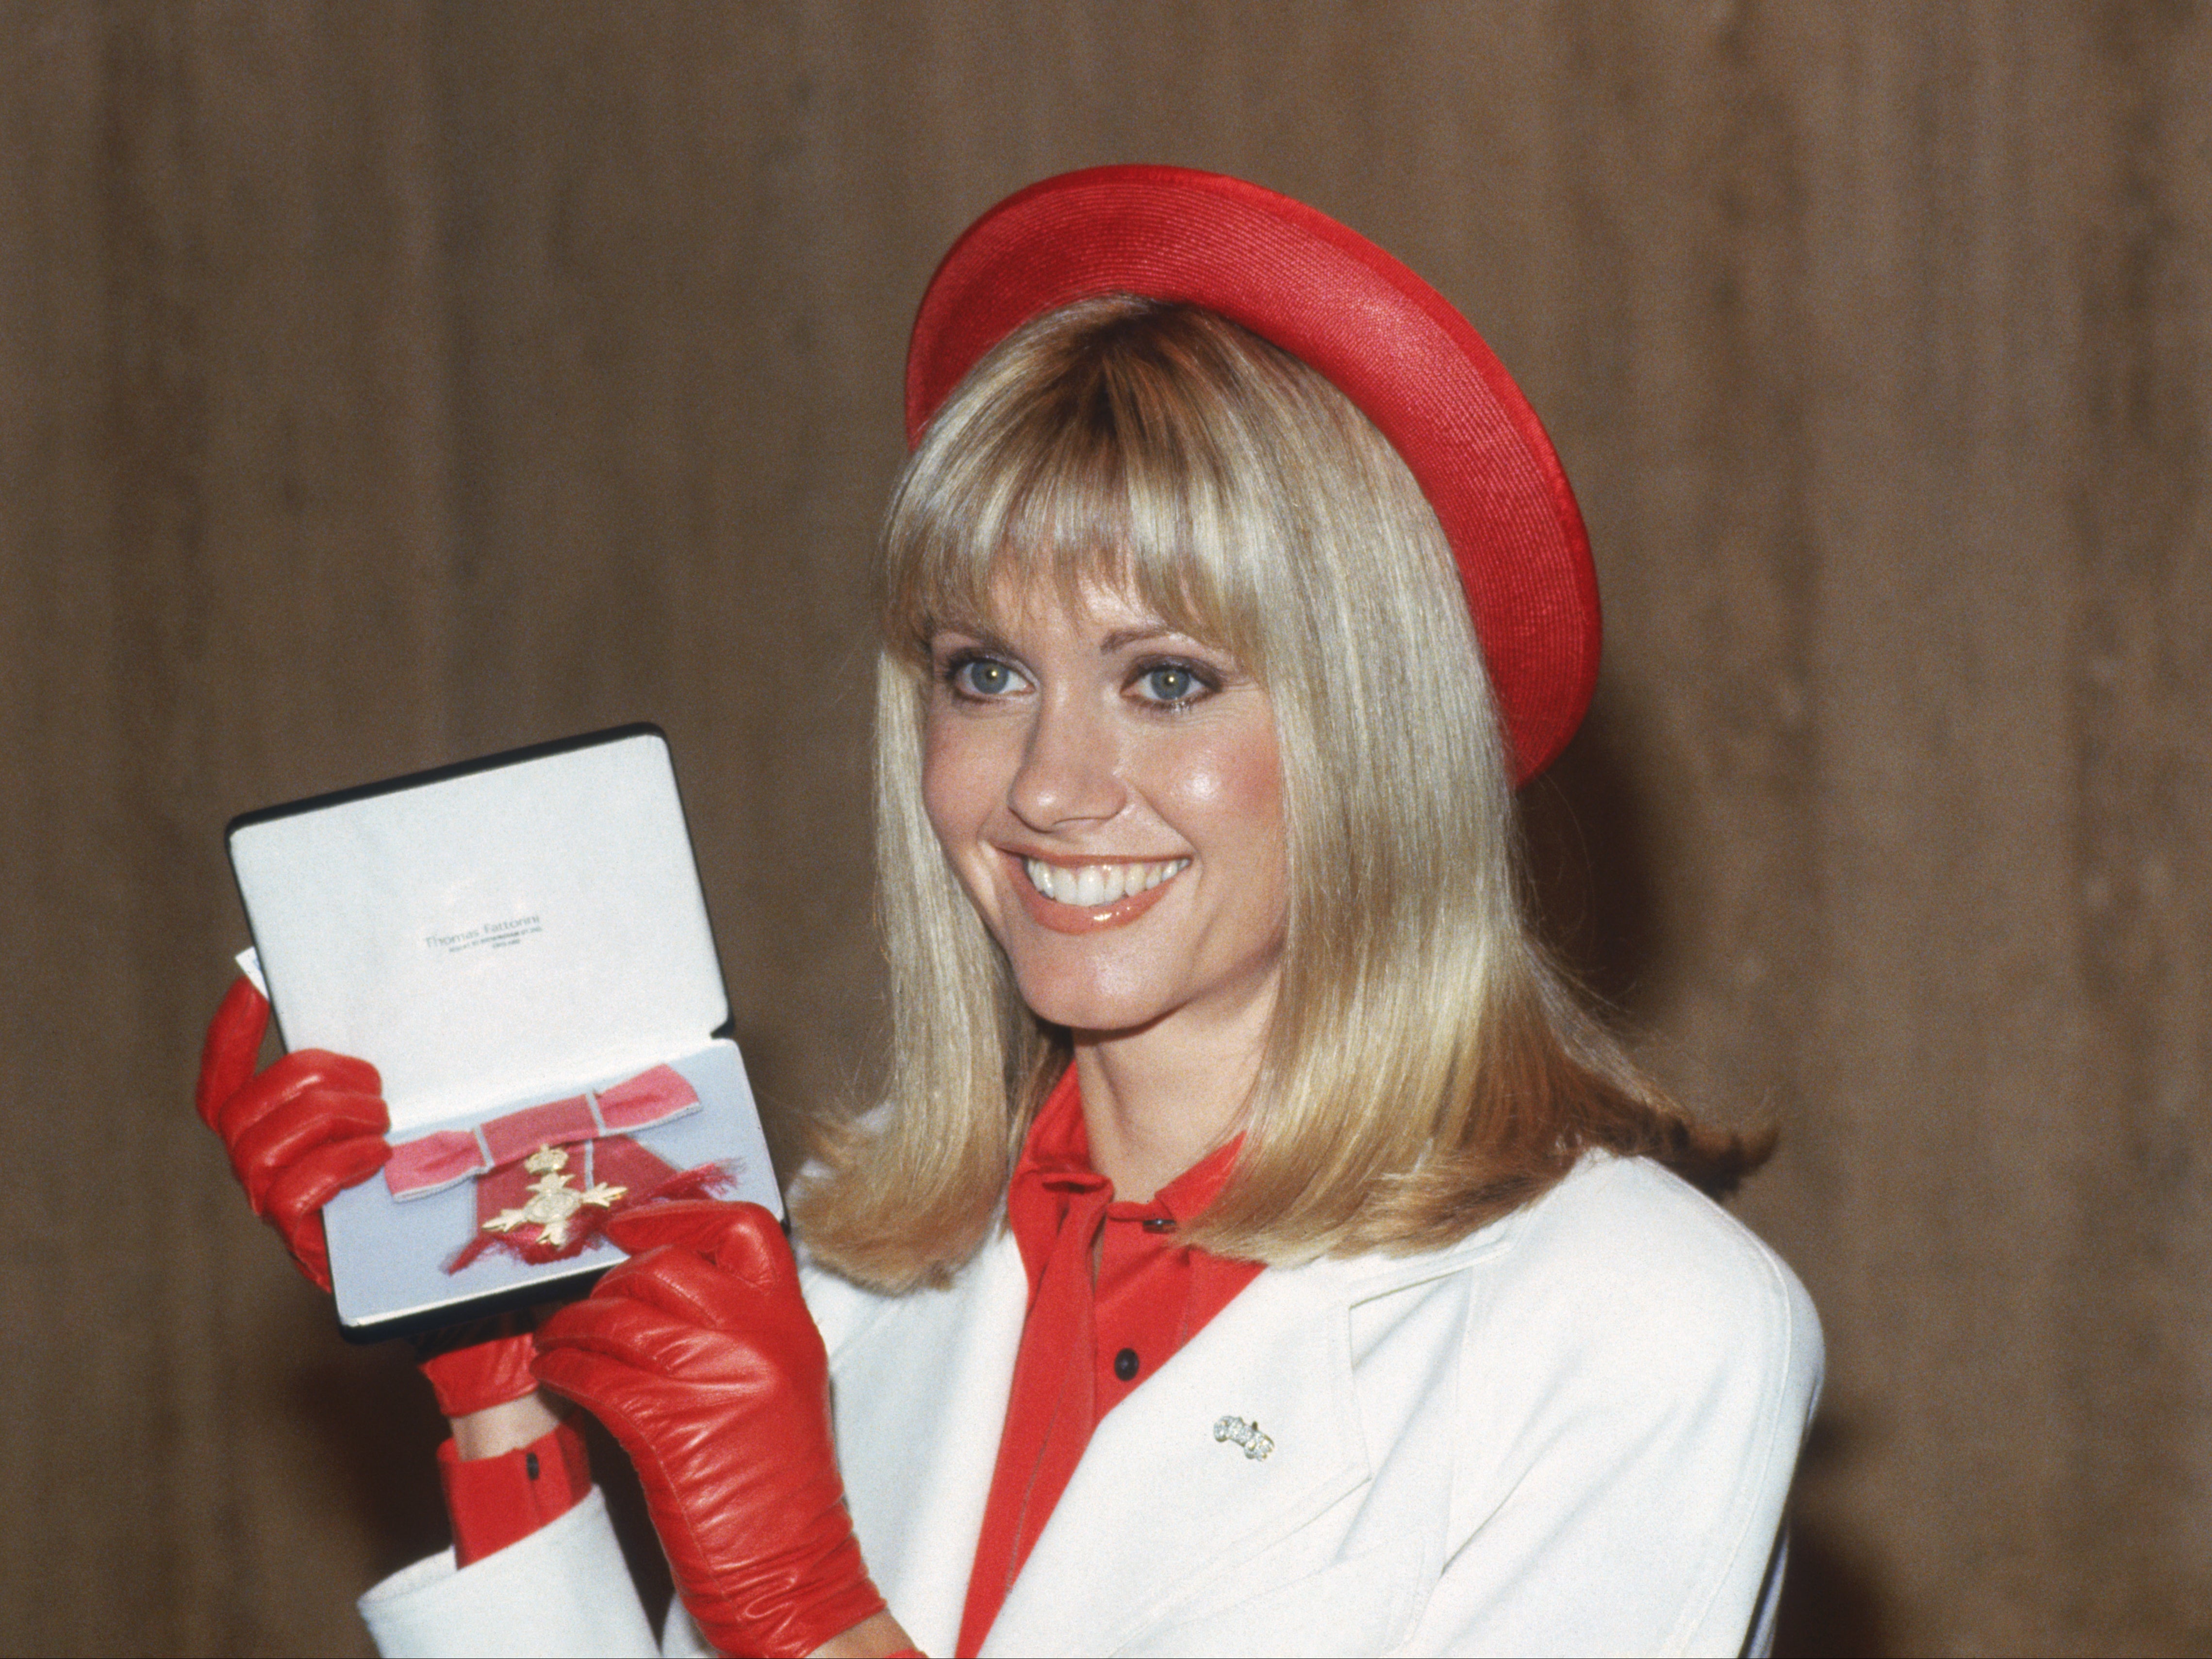 Newton-John receiving an OBE at Buckingham Palace in 1979. She was later made a Dame in 2020 for services to charity, cancer research and entertainment